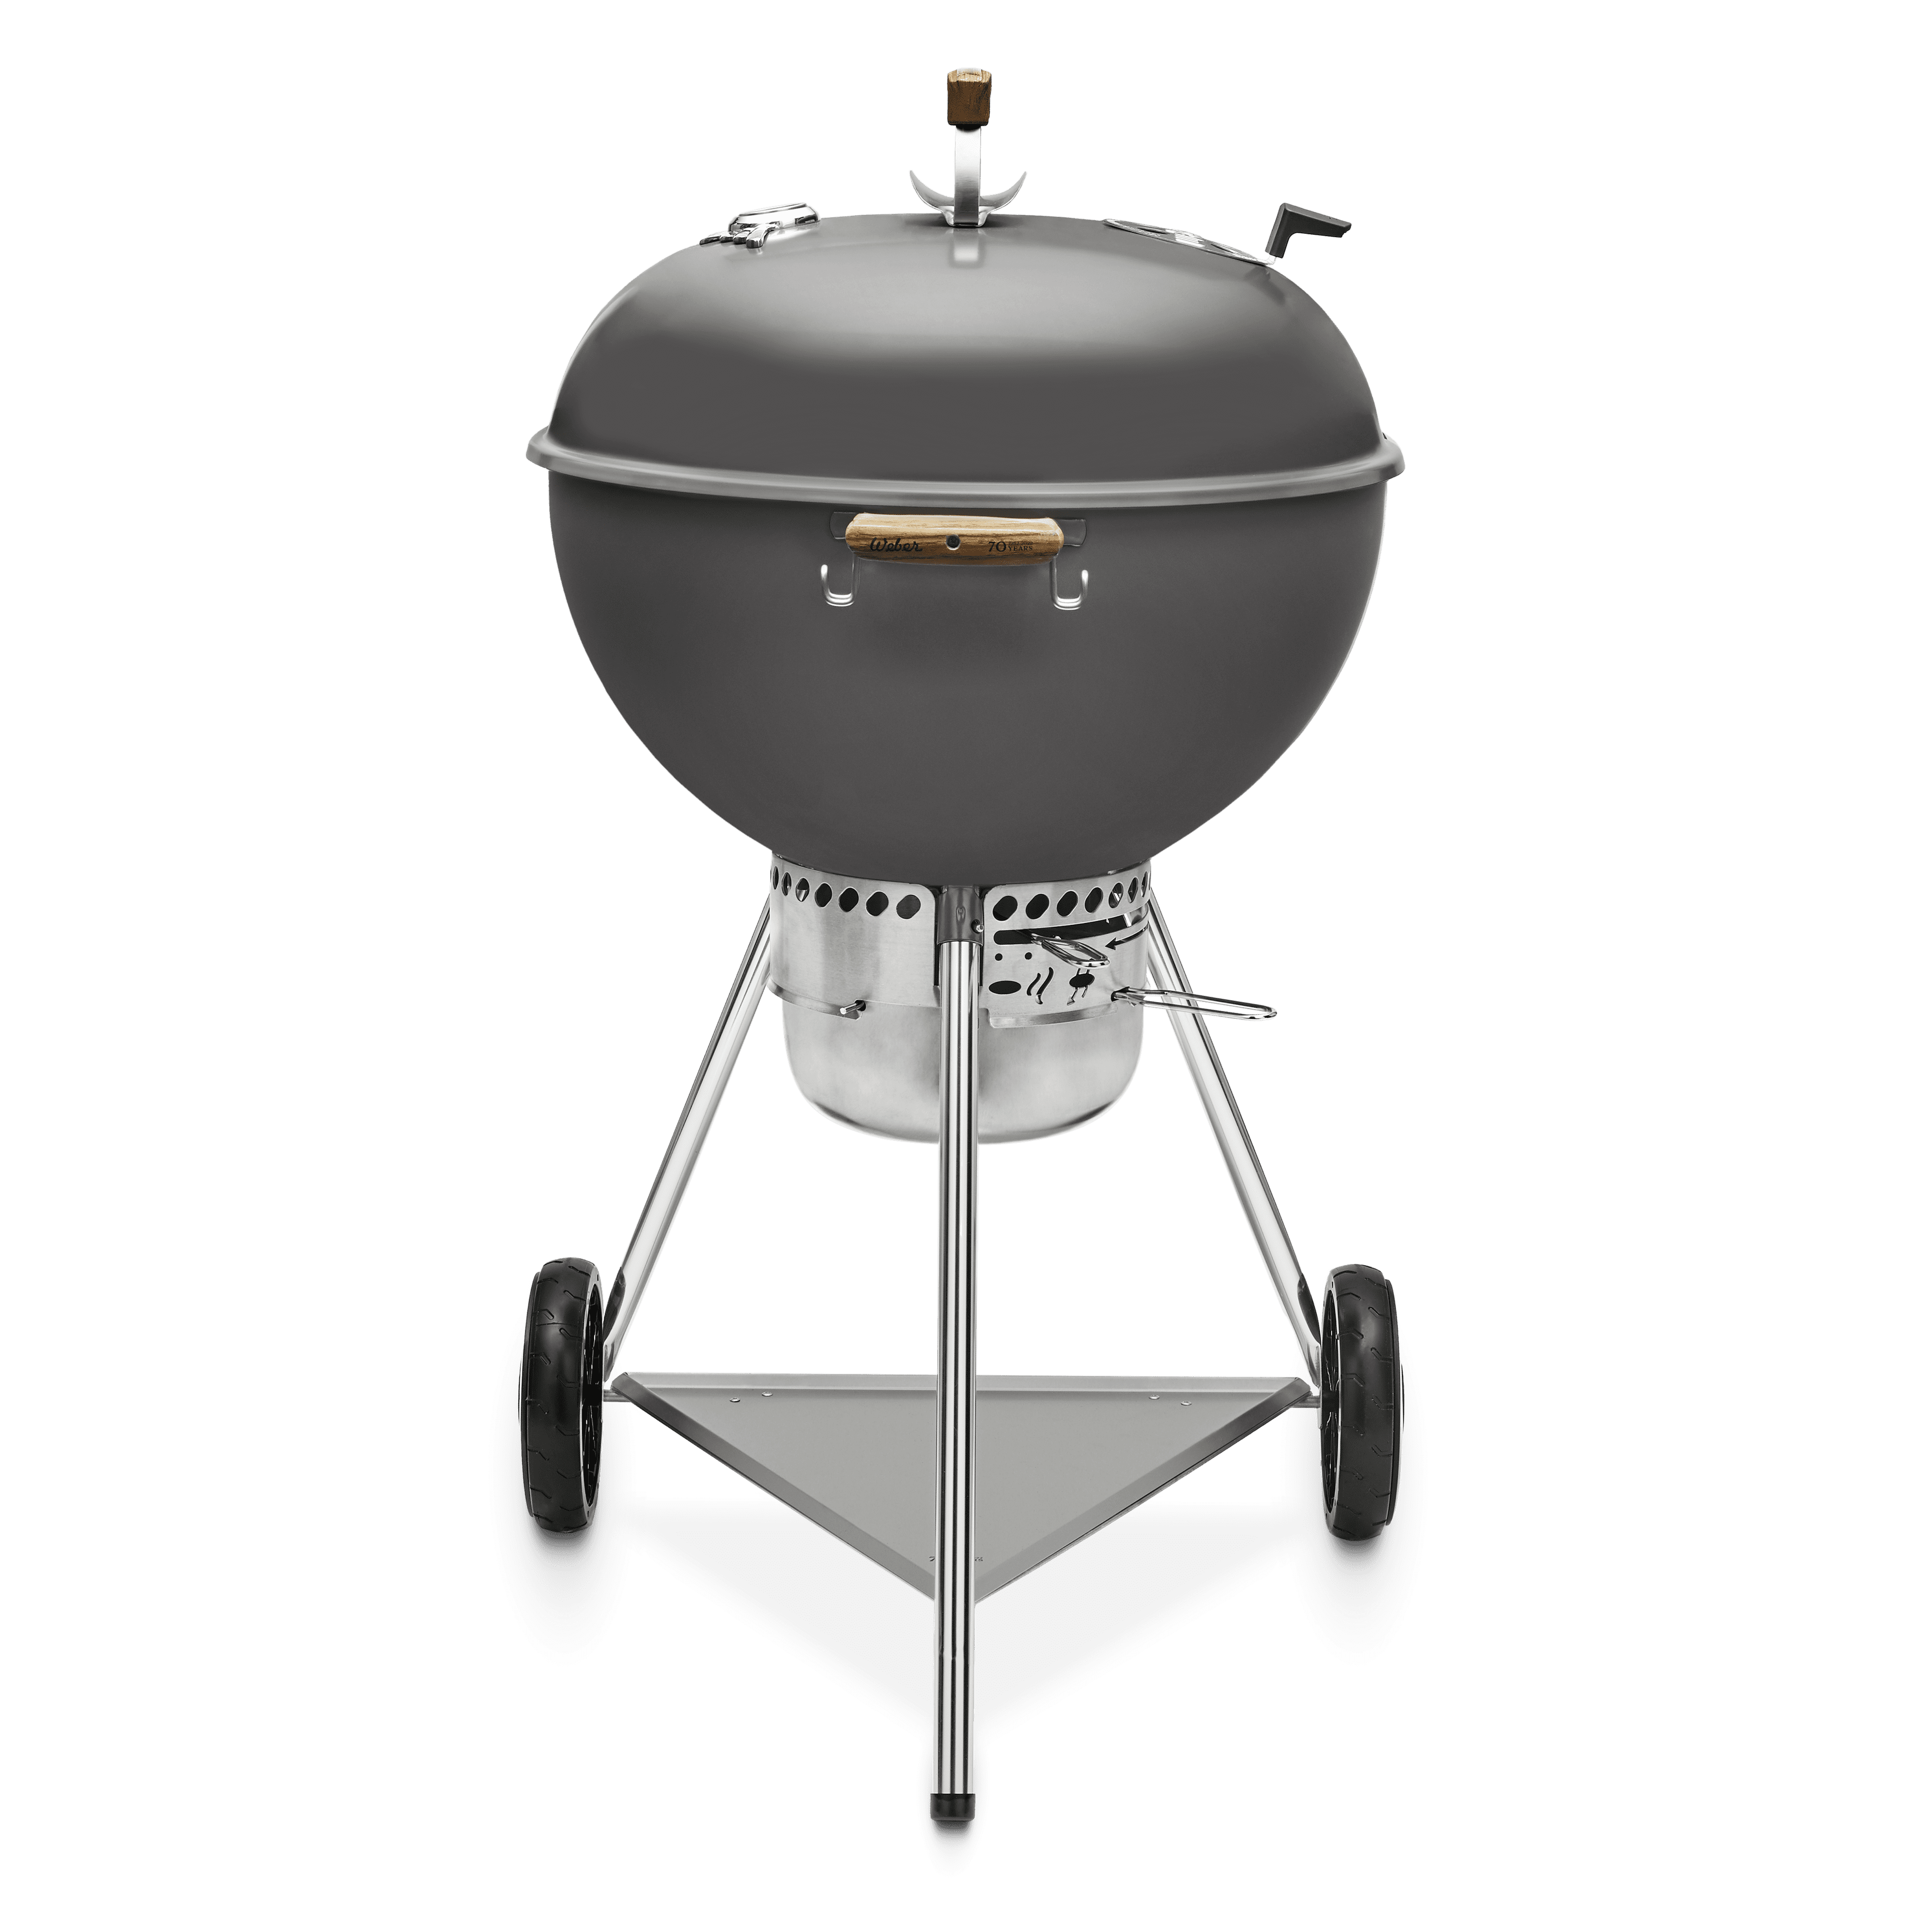 70th Anniversary Edition Master Touch Kettle  Holzkohlegrill 57 cm in Hollywood-Grau - Weber